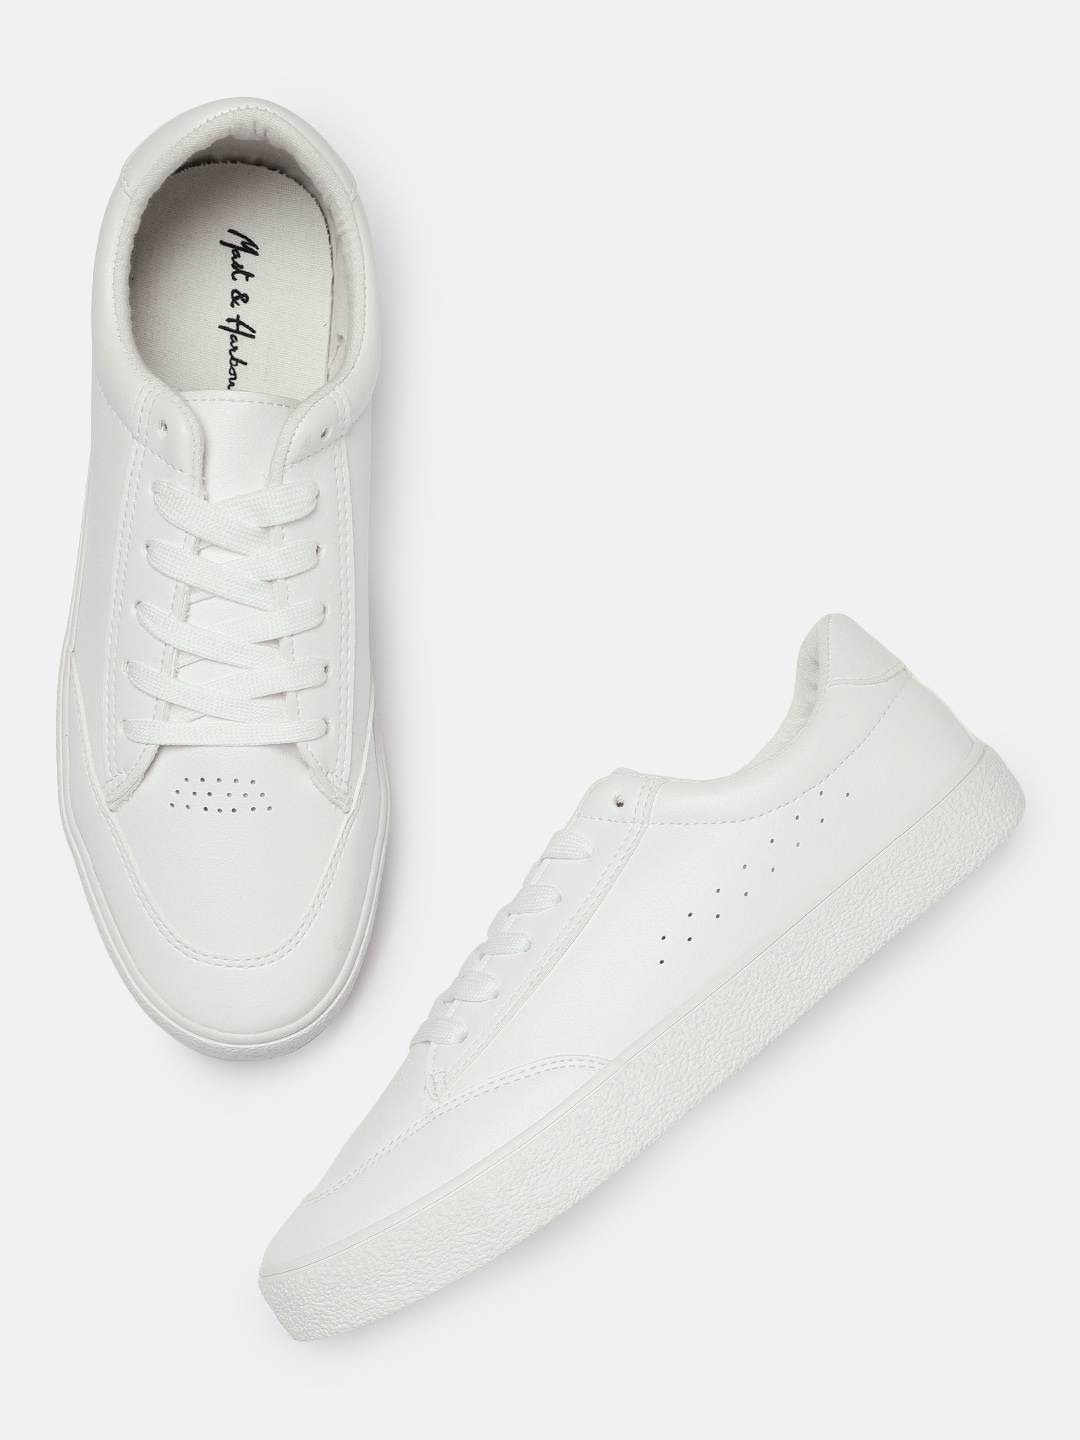 mast harbour white sneakers